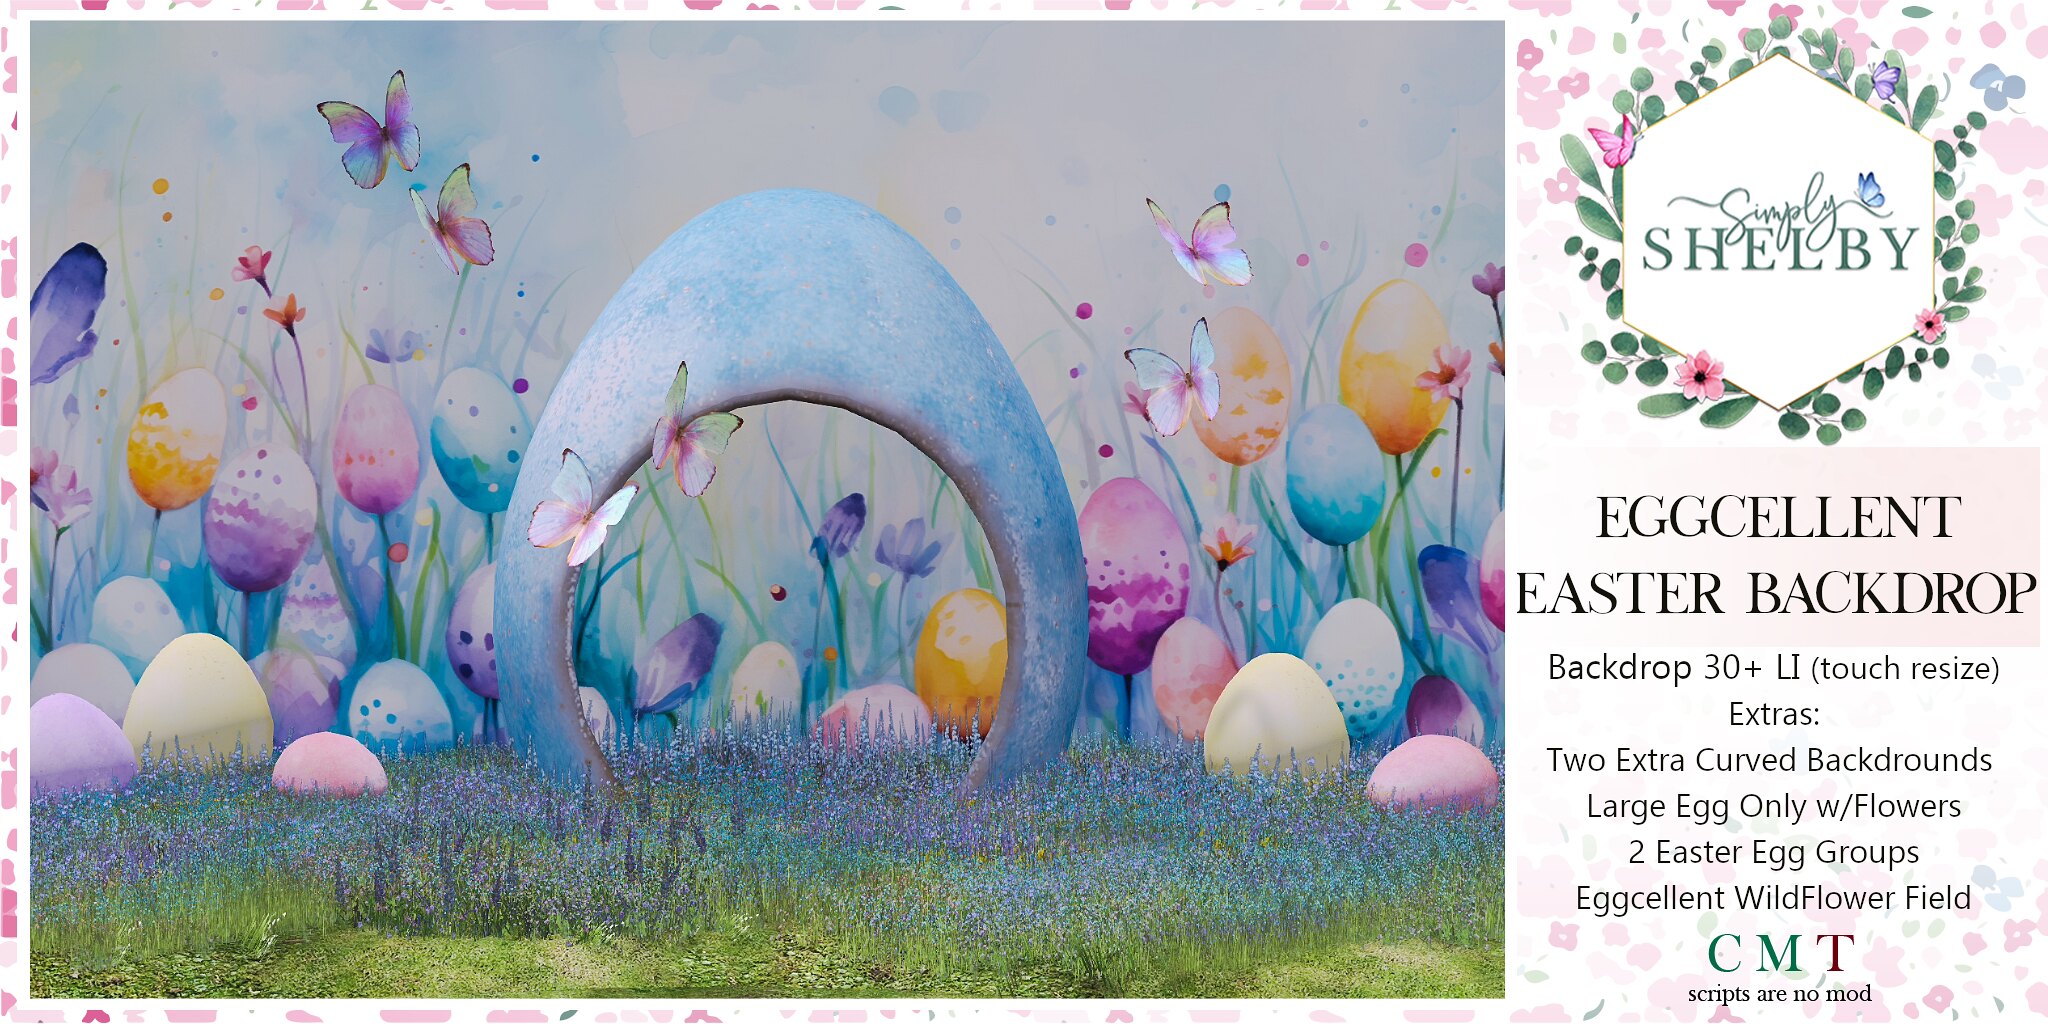 Simply Shelby – Eggcellent Easter Backdrop